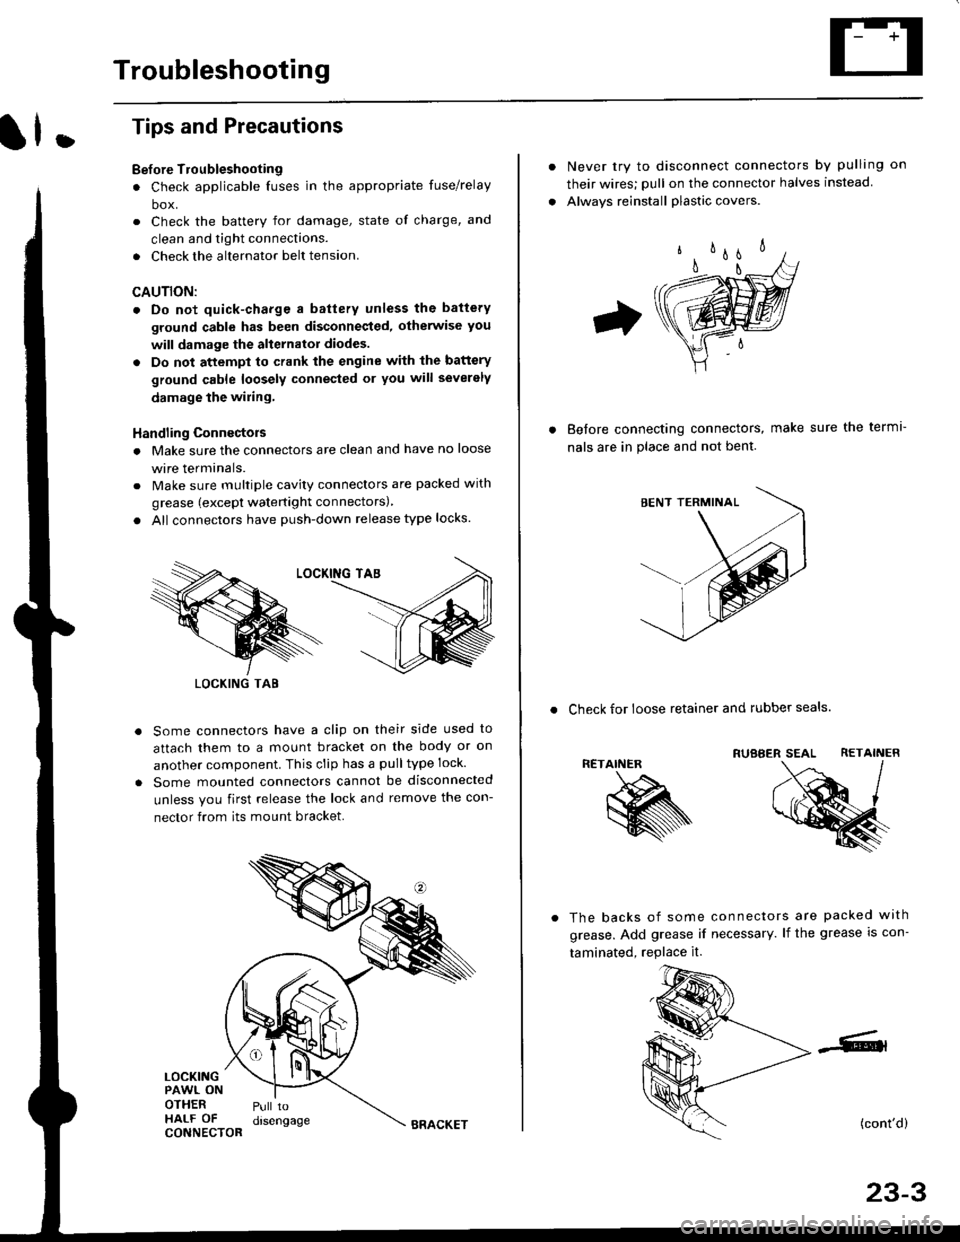 HONDA CIVIC 1998 6.G Workshop Manual Troubleshooting
ll.
Tips and Precautions
Bef ore Troubleshooting
. Check applicable fuses in the appropriate fuse/relay
box.
. Check the battery for damage, state of charge, and
clean and tight connec